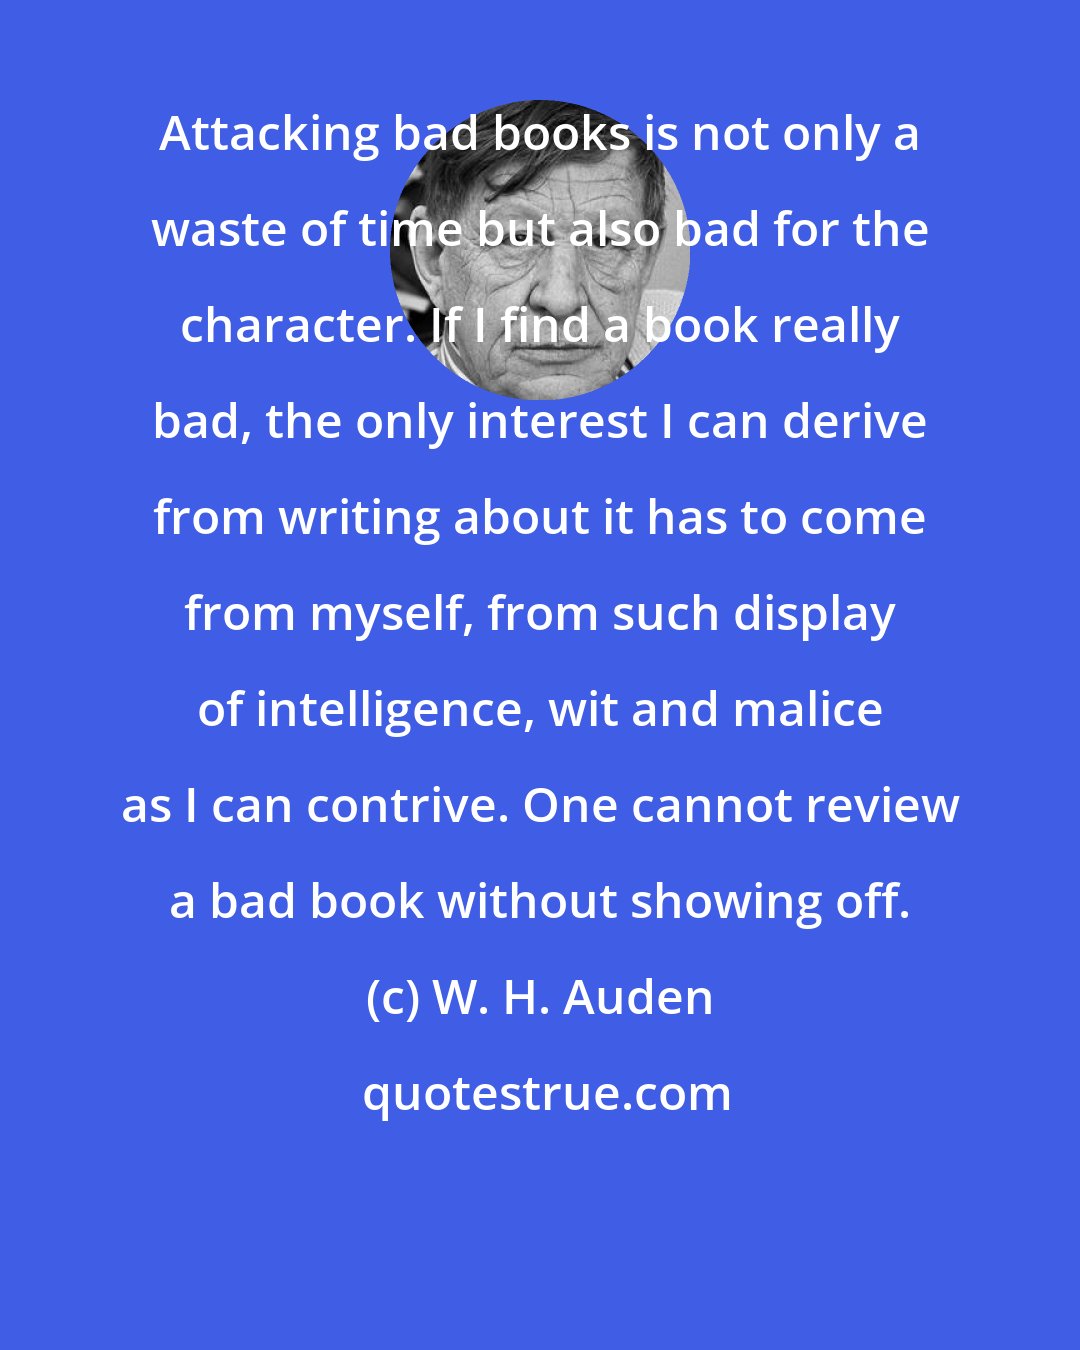 W. H. Auden: Attacking bad books is not only a waste of time but also bad for the character. If I find a book really bad, the only interest I can derive from writing about it has to come from myself, from such display of intelligence, wit and malice as I can contrive. One cannot review a bad book without showing off.